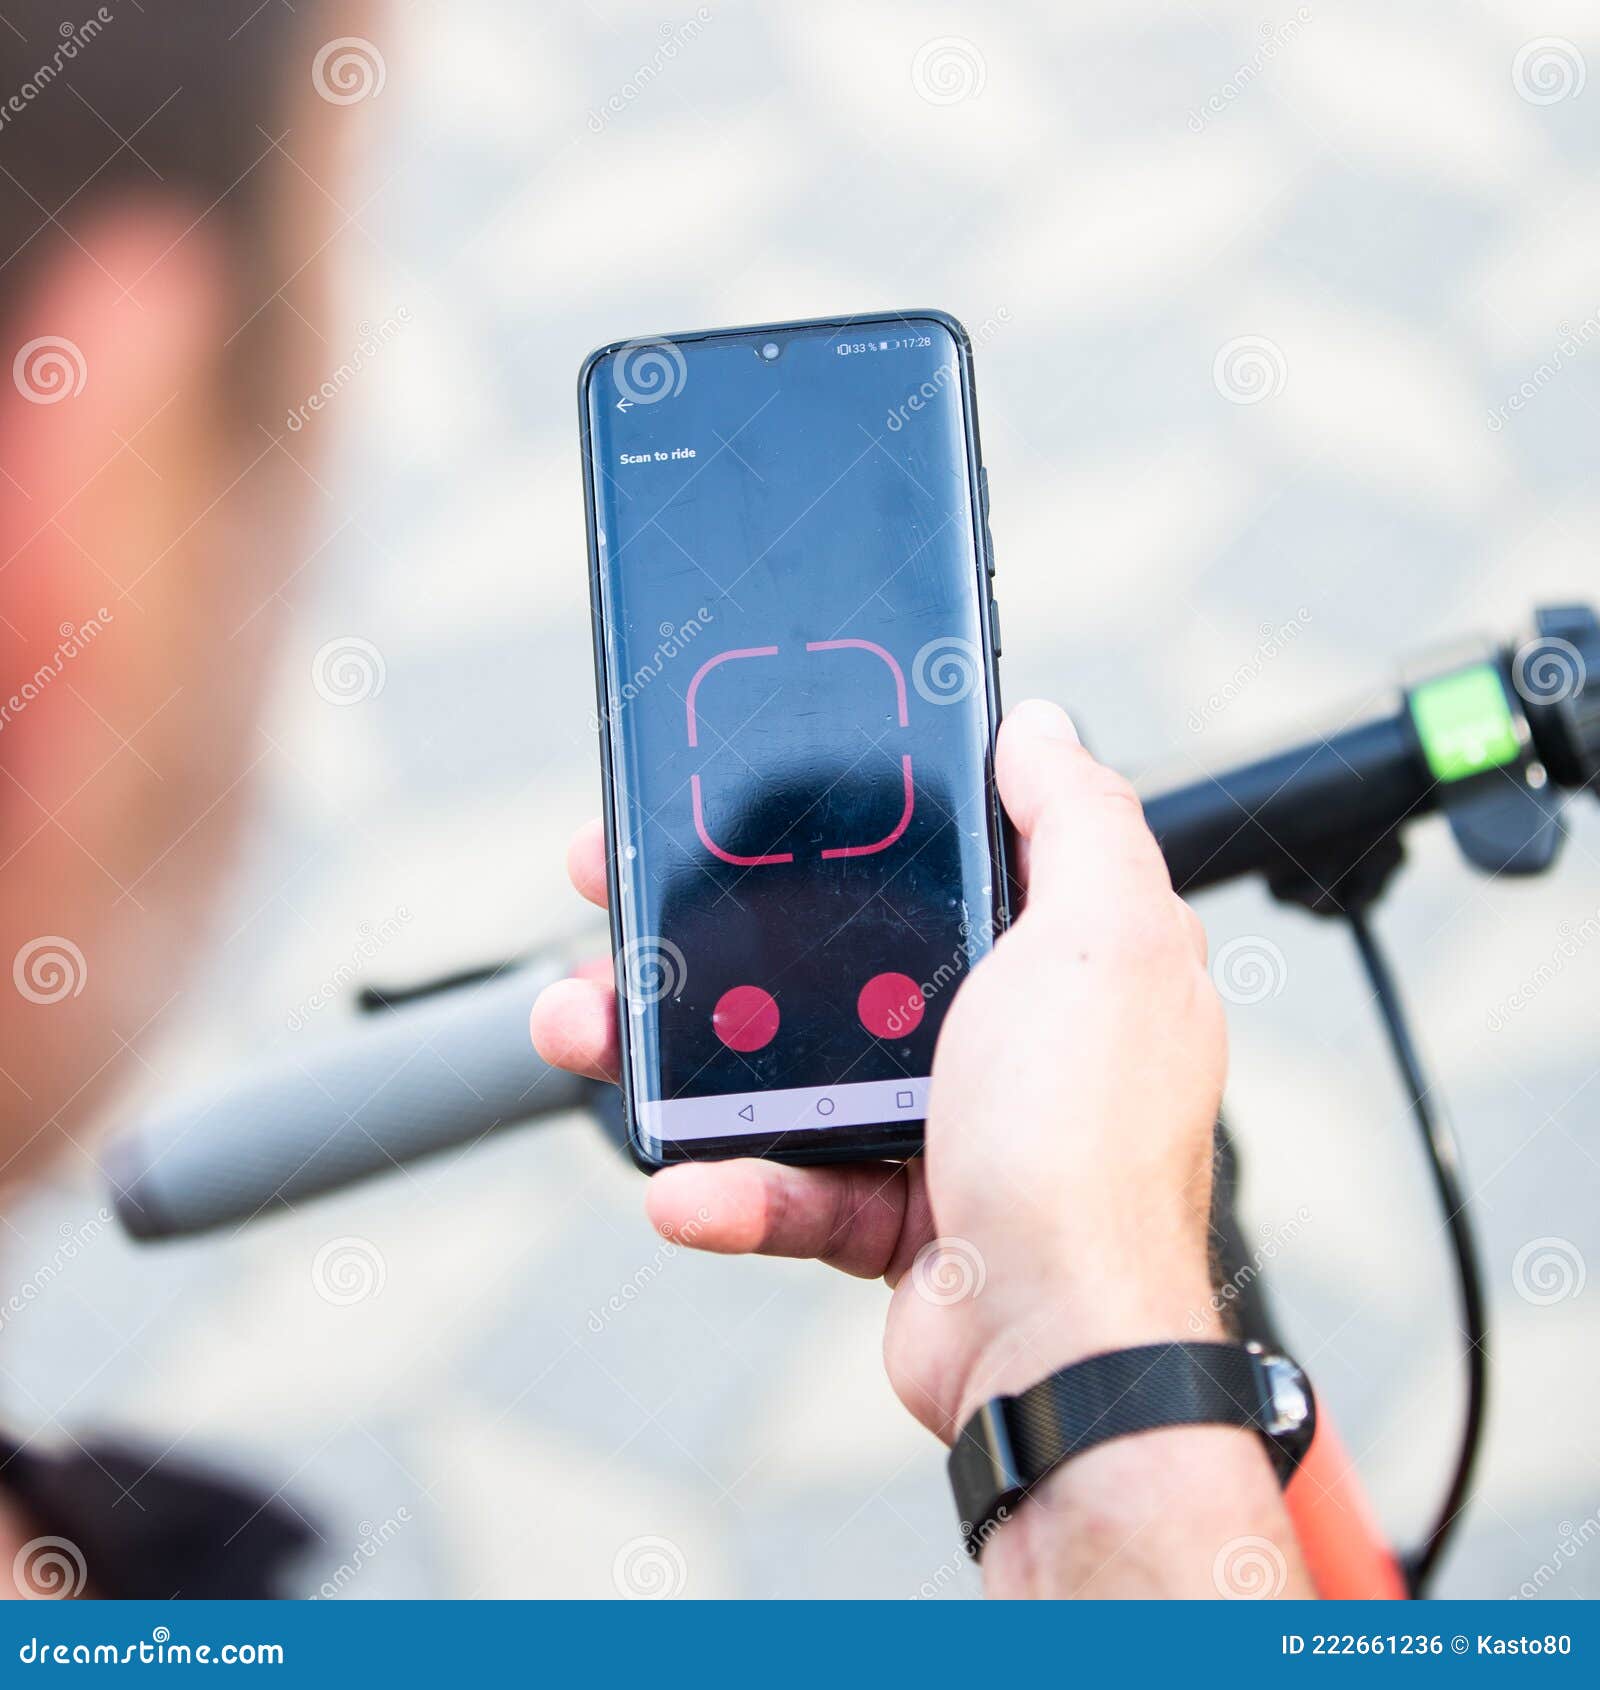 close up of hand and smartphone, unlocking dockless electric scooter for rent with debranded generic phone app.